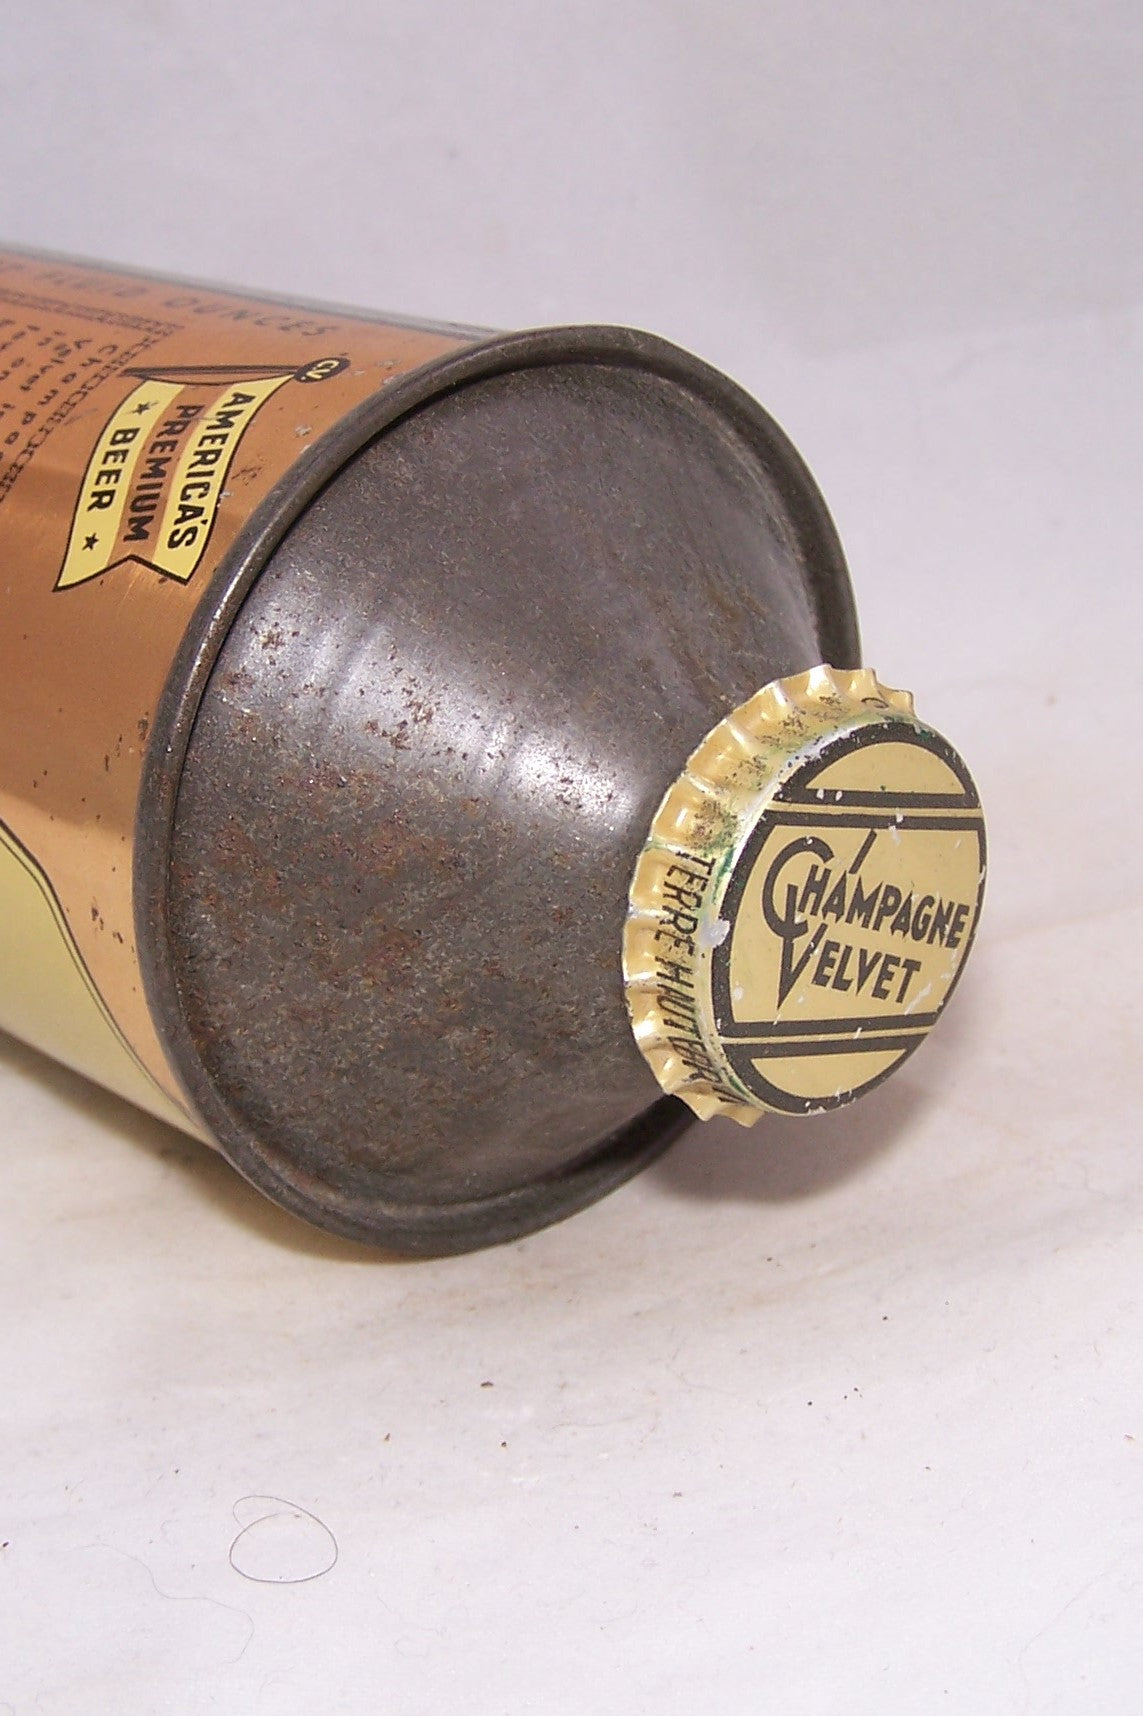 Champagne Velvet (1944 on Policy) with original Crown, USBC 157-06, Grade 1  Sold on 11/08/19